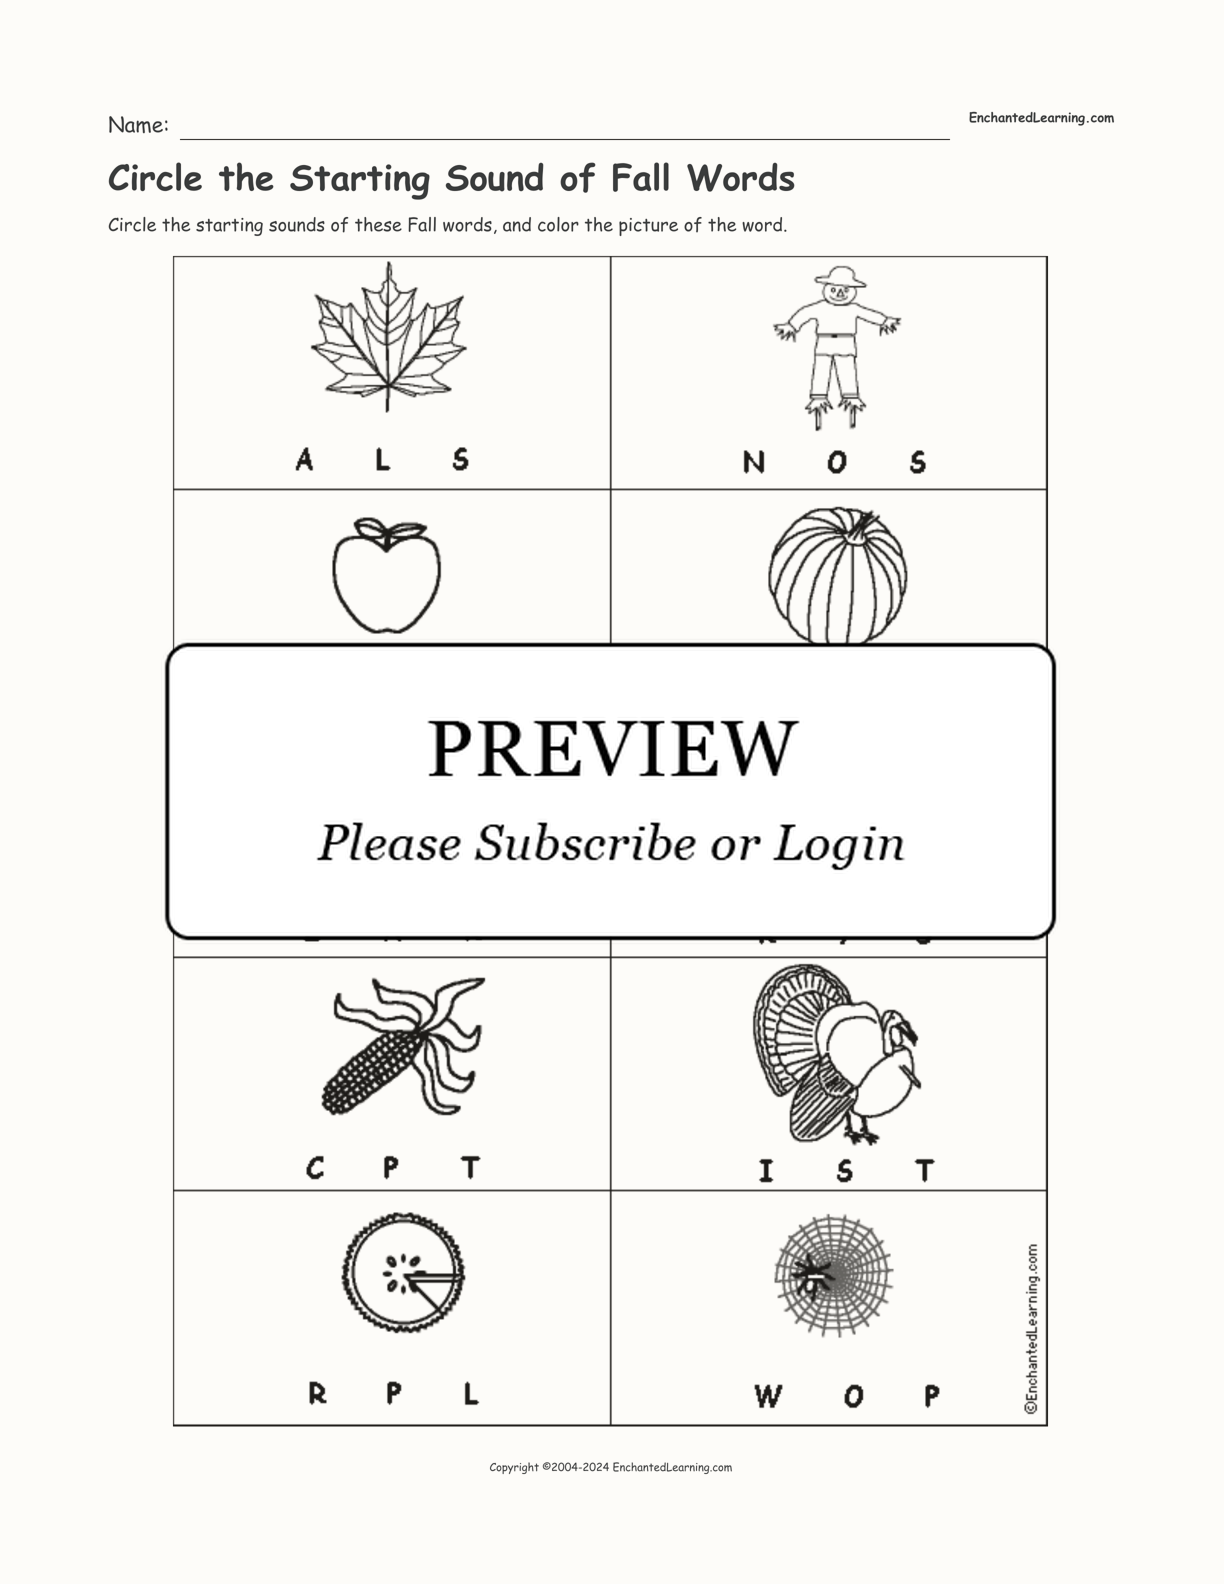 Circle the Starting Sound of Fall Words interactive worksheet page 1